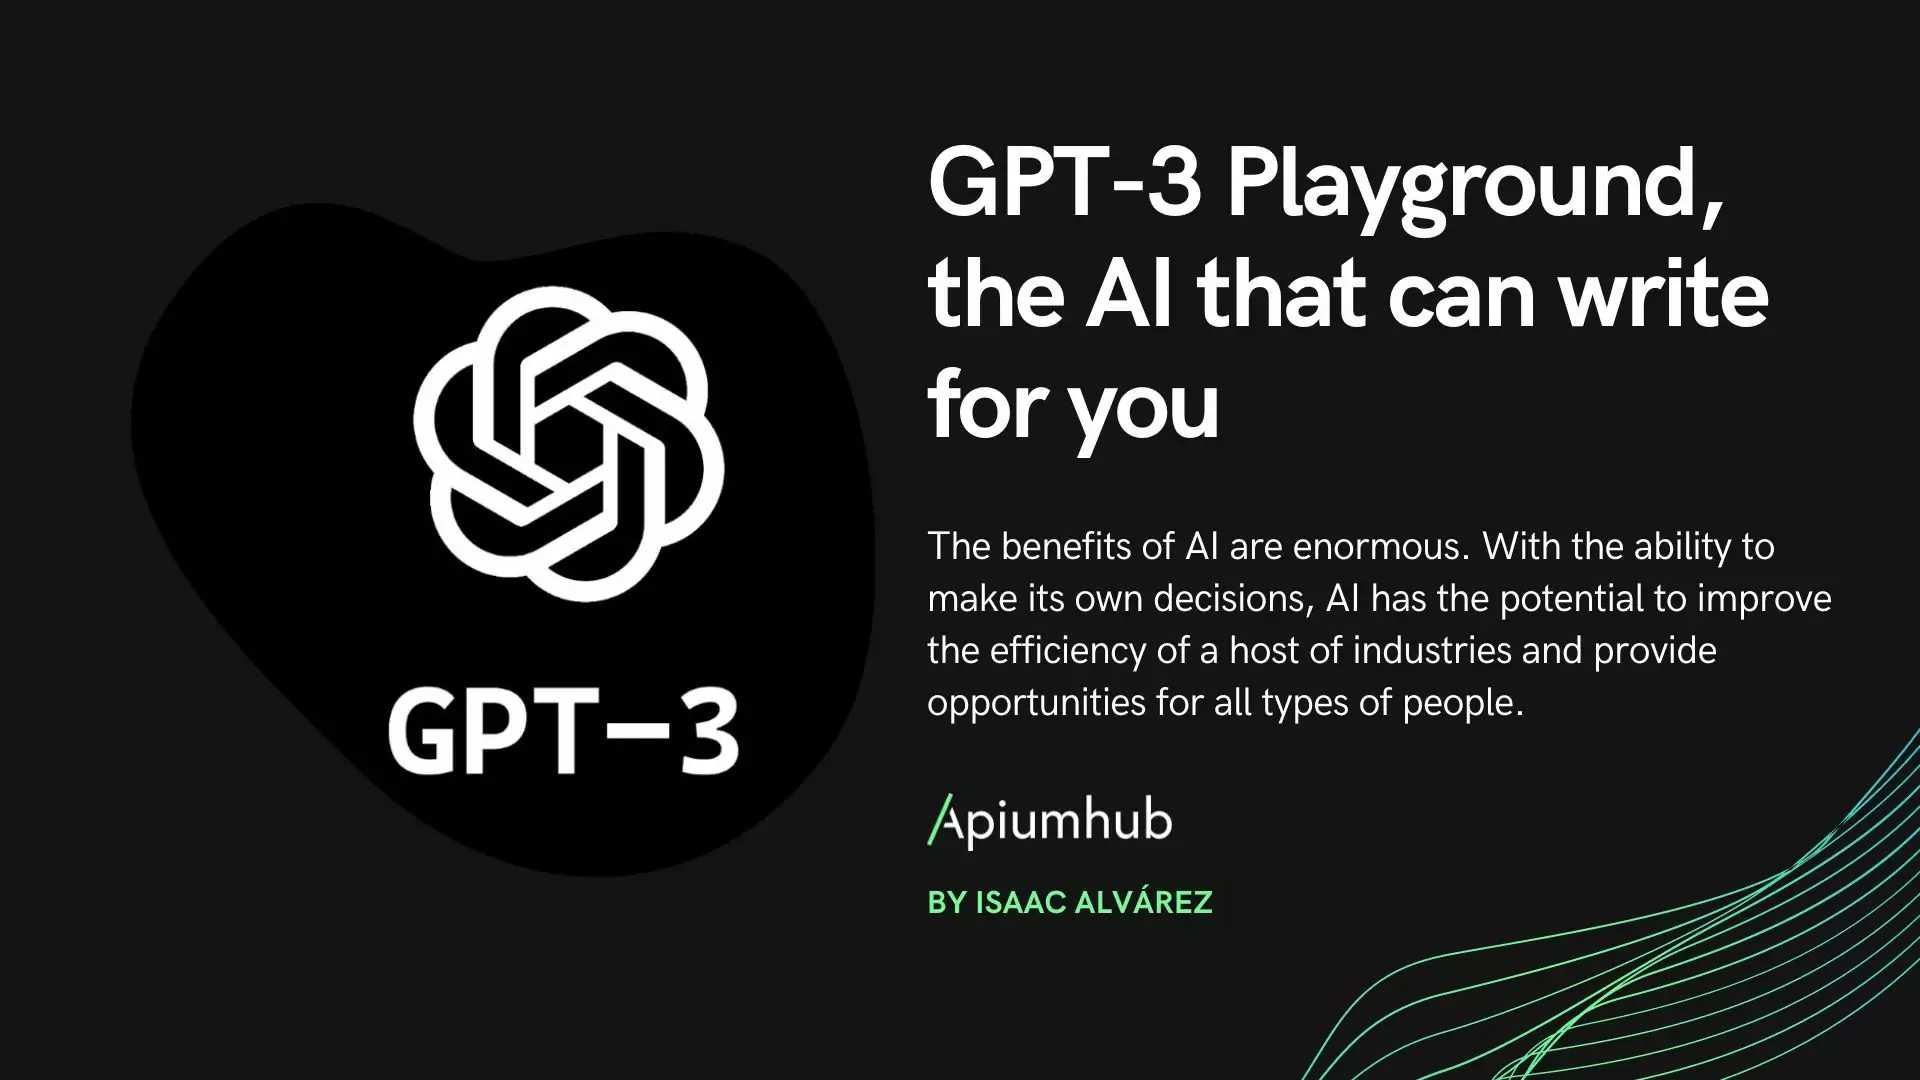 GPT-3 Playground, the AI that can write for you